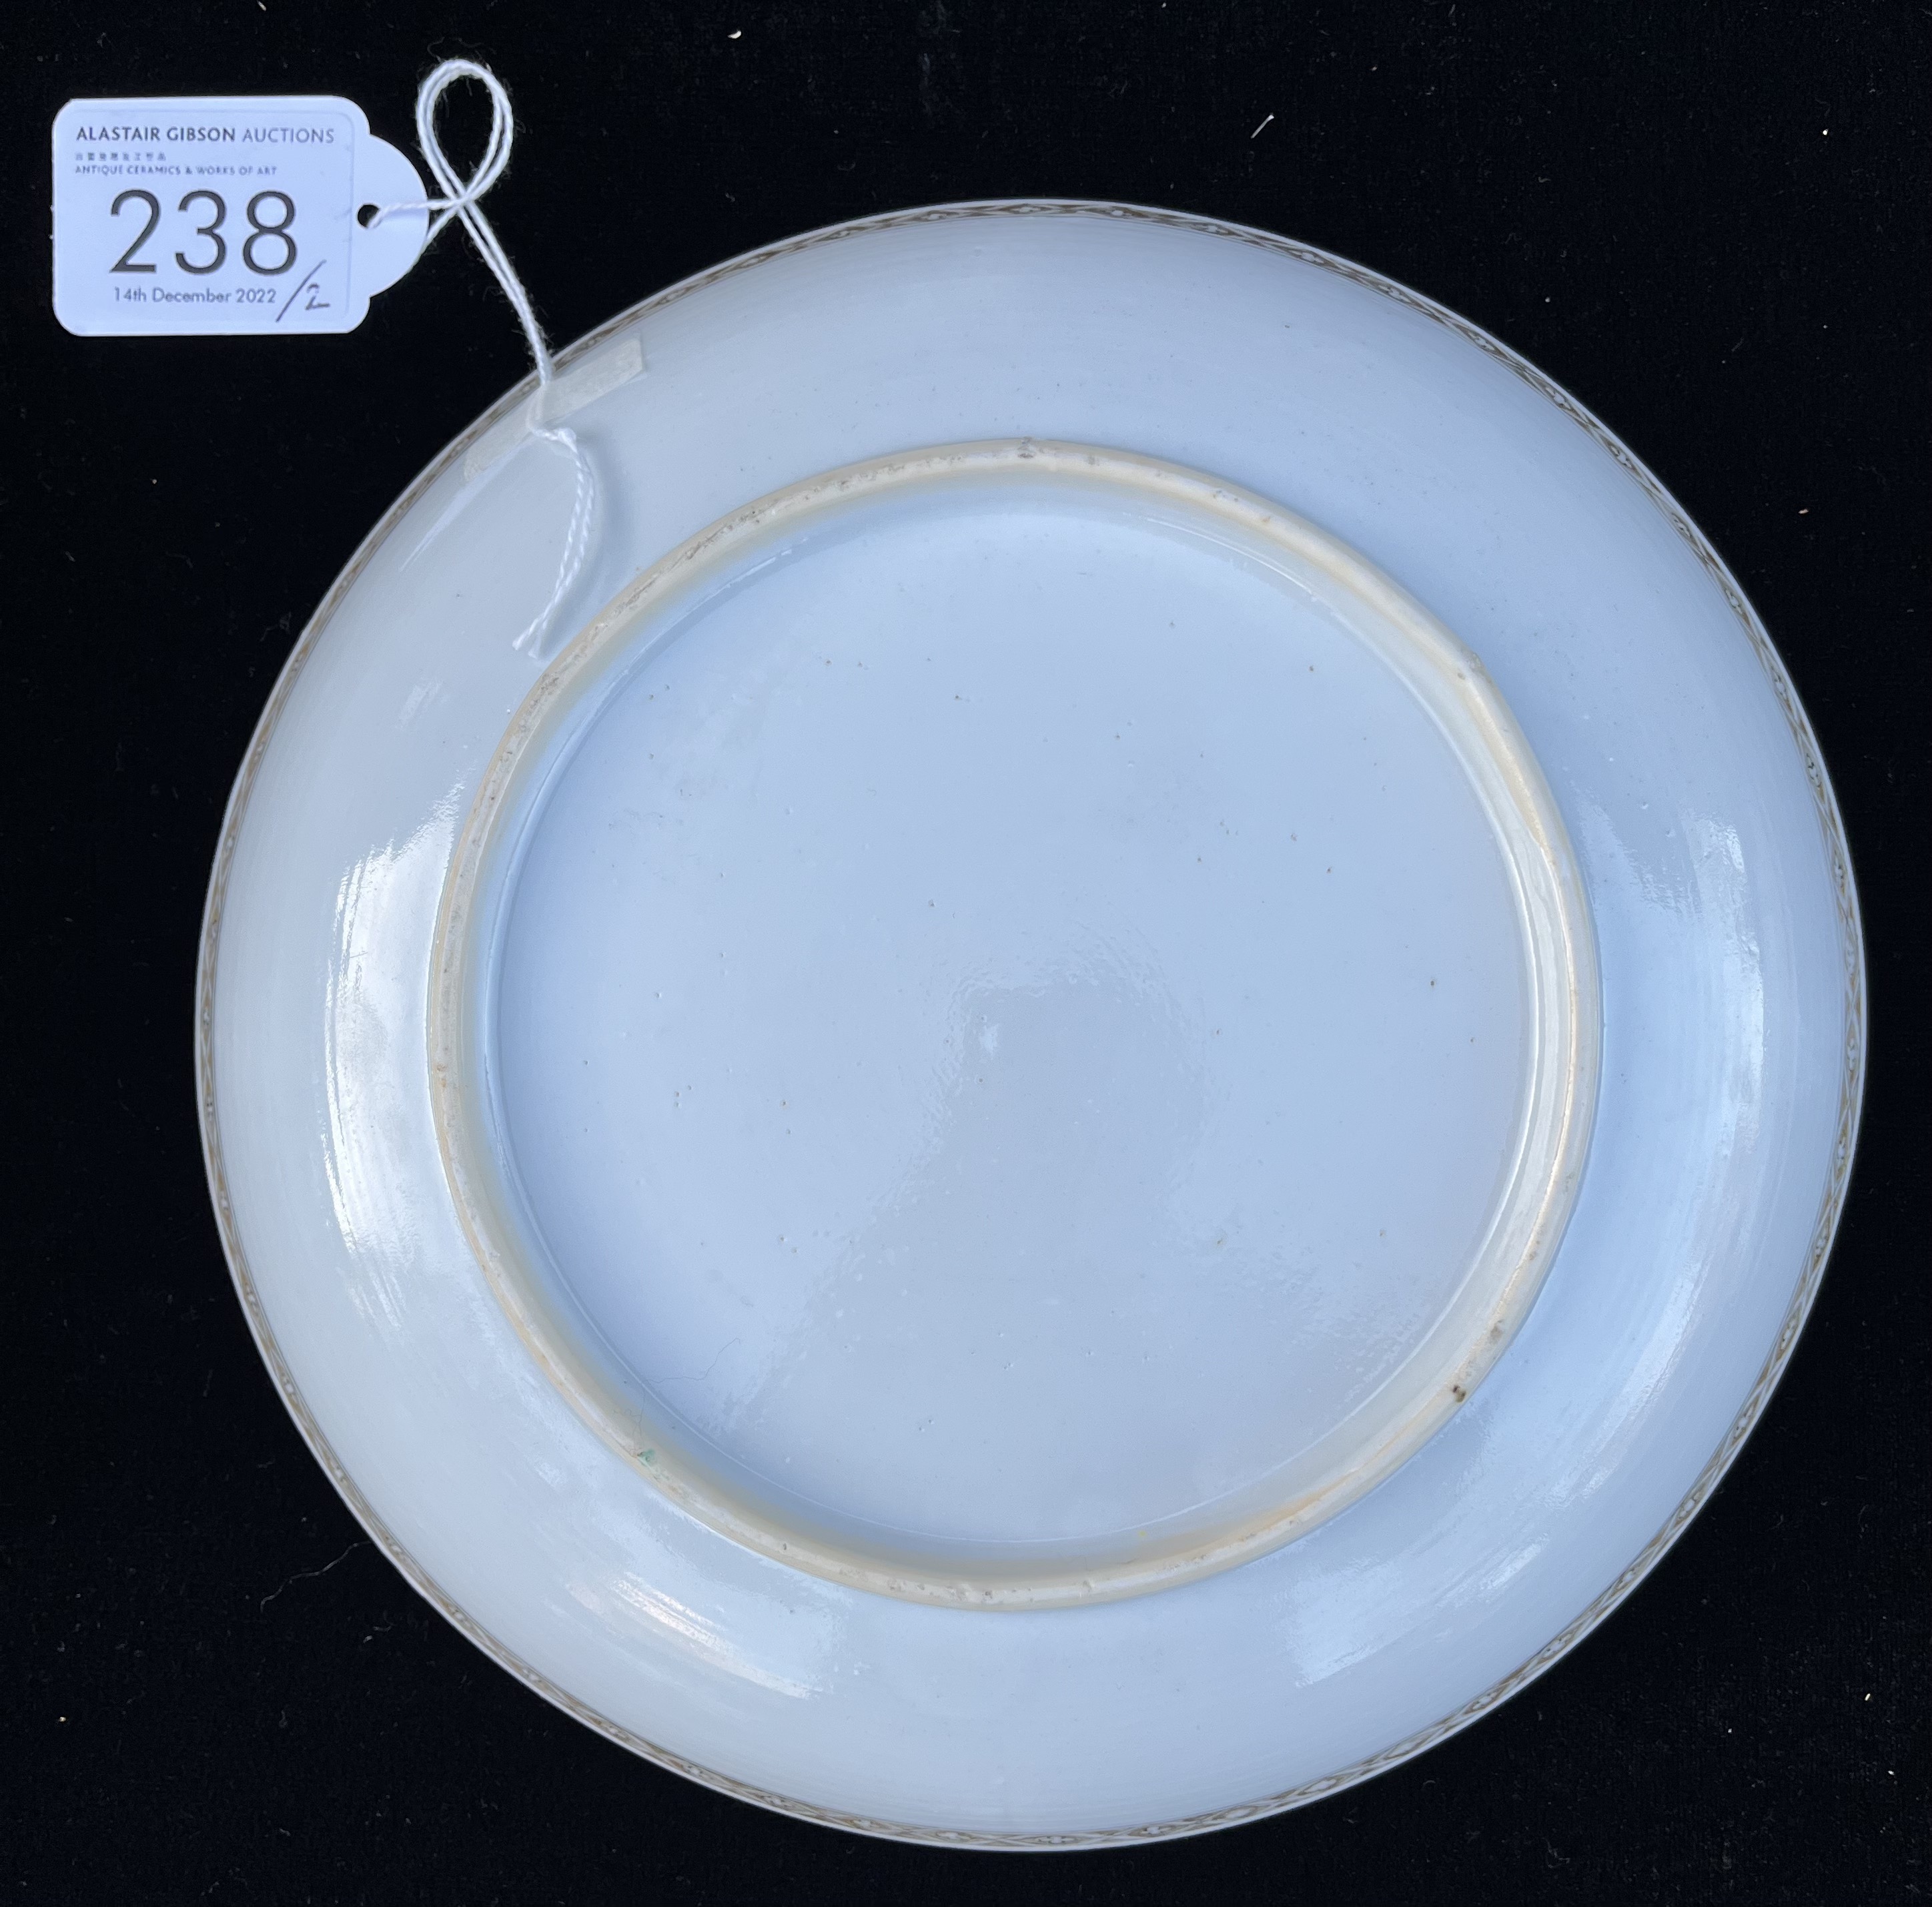 A PAIR OF CHINESE EXPORT ‘FAMILLE ROSE’ ‘PRONK DOCTOR’S VISIT' SAUCER DISHES, QIANLONG, CIRCA 1740 - Image 4 of 11